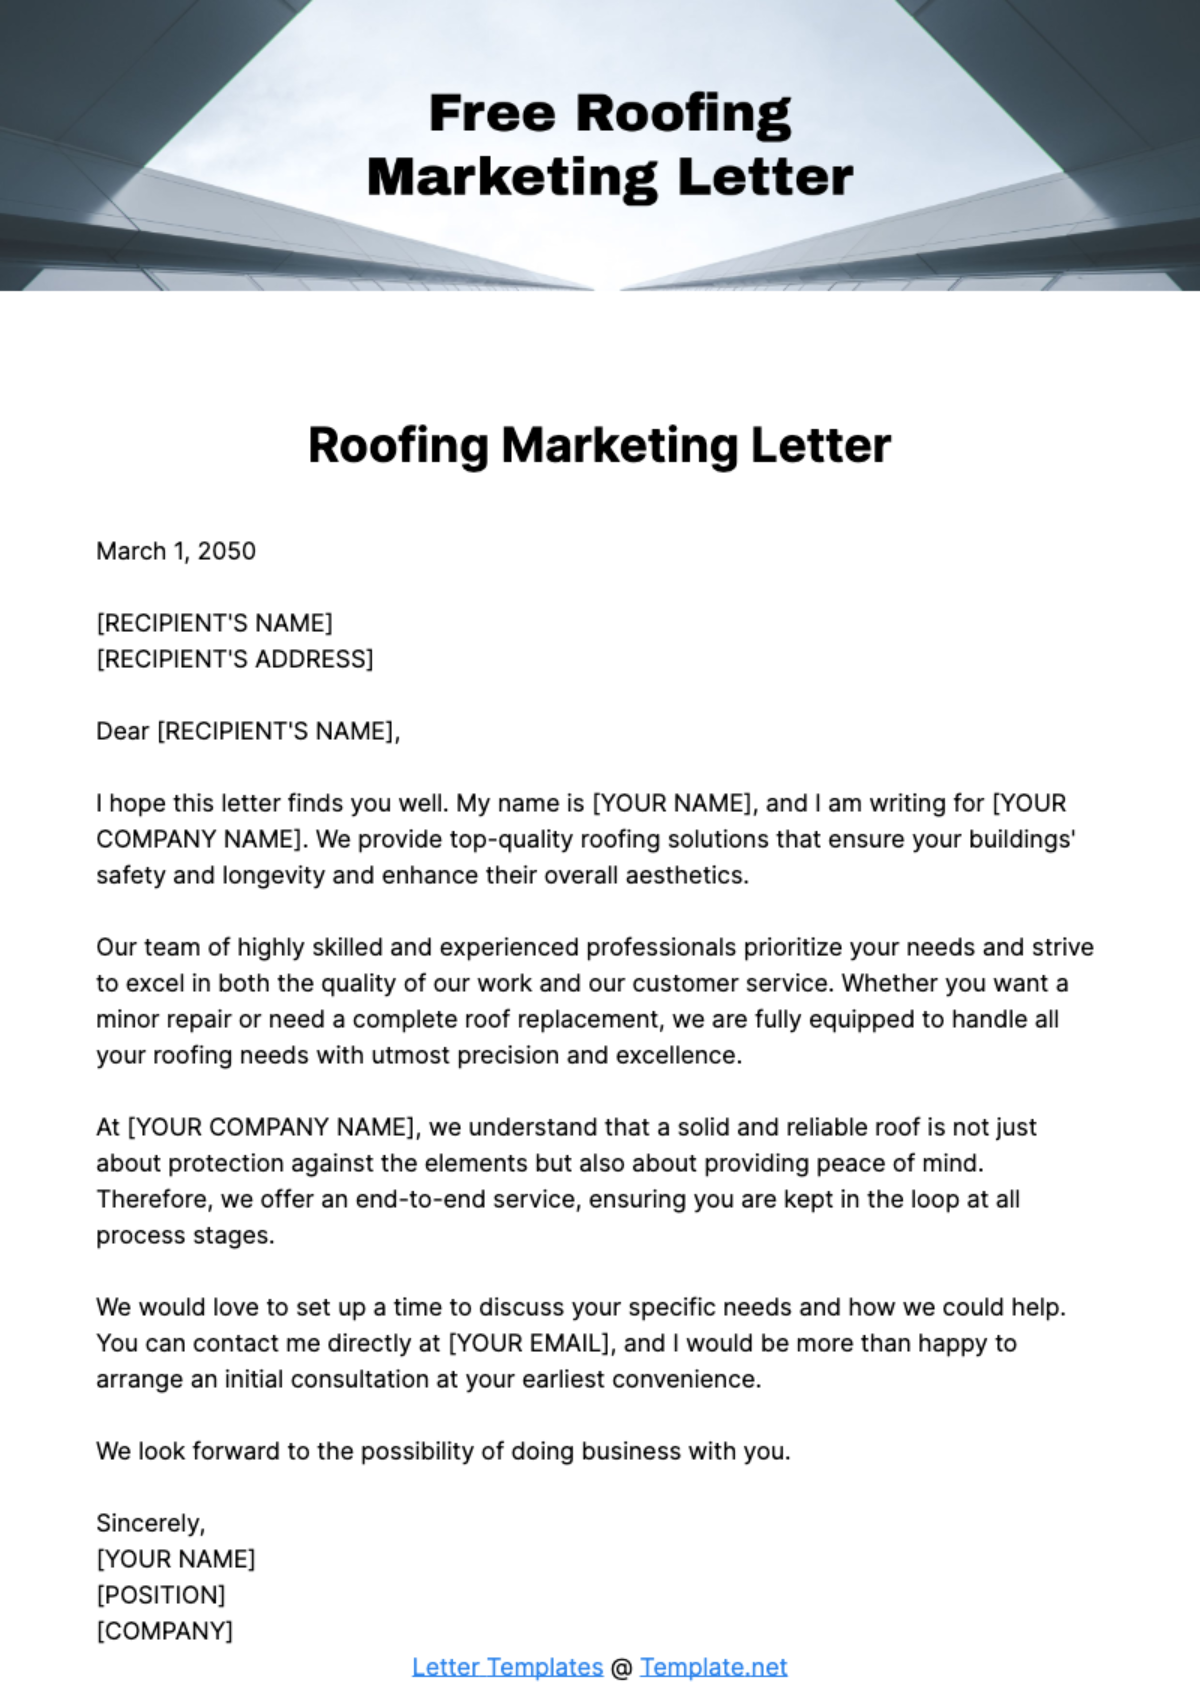 Free Roofing Marketing Letter Template